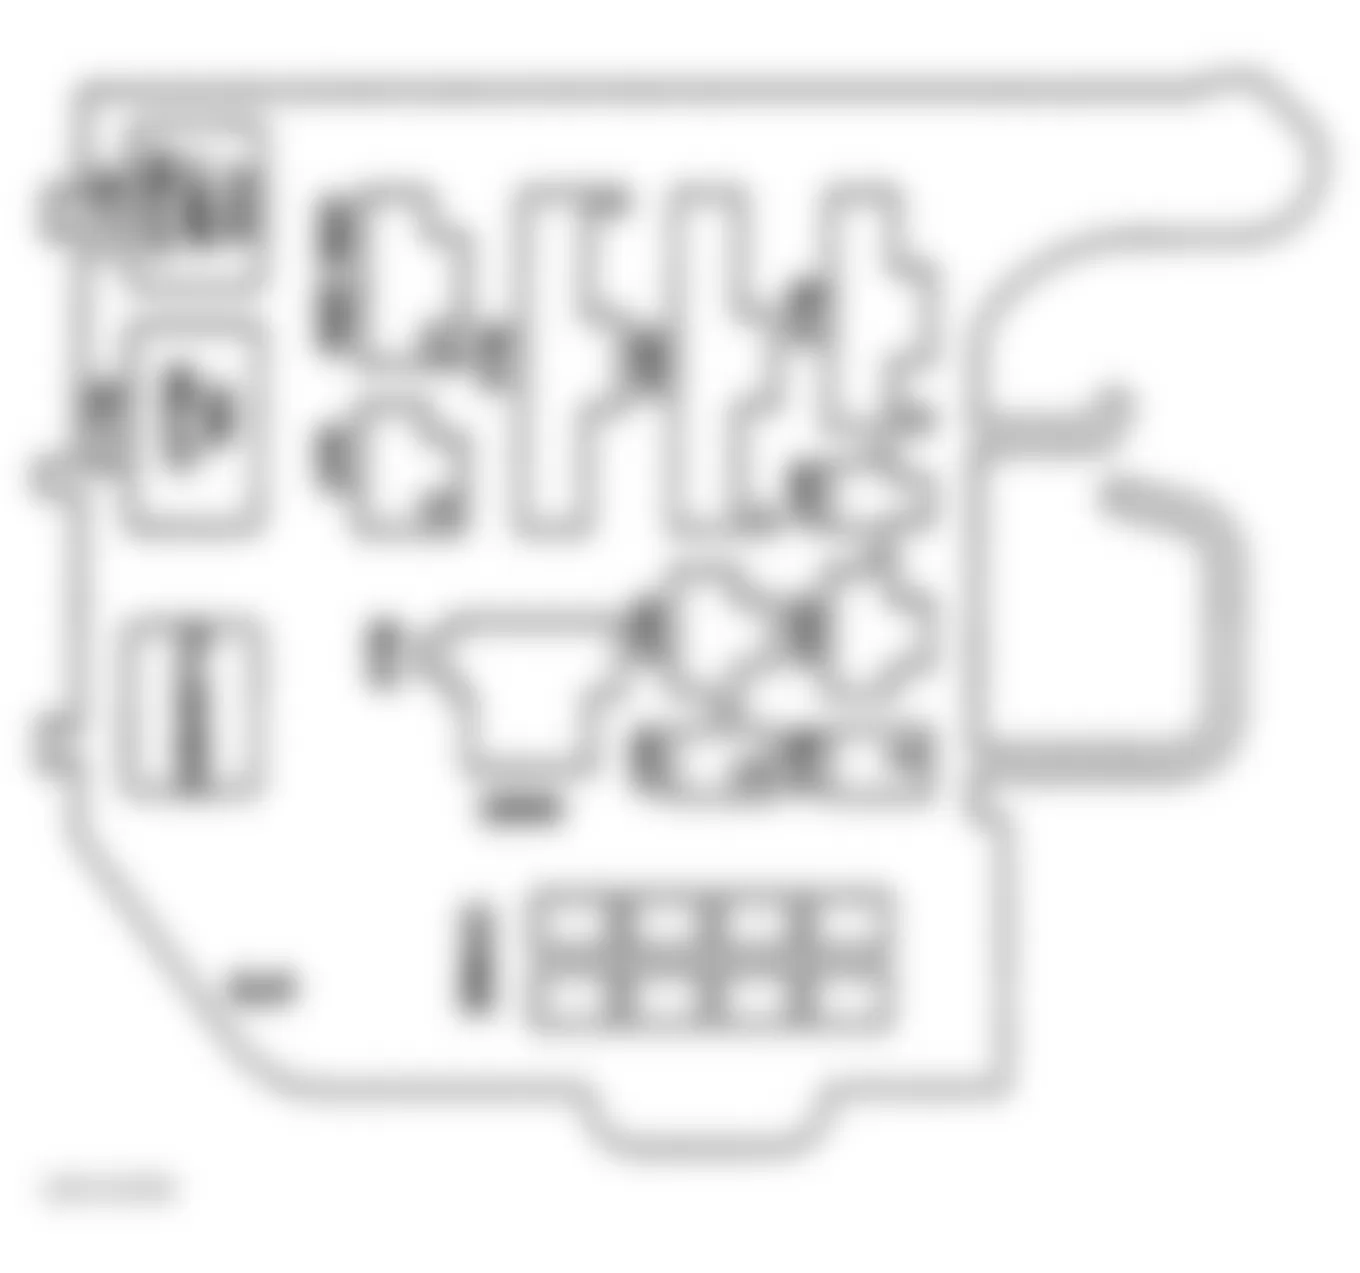 GMC C3500 HD 1997 - Component Locations -  Identifying Convenience Center Components